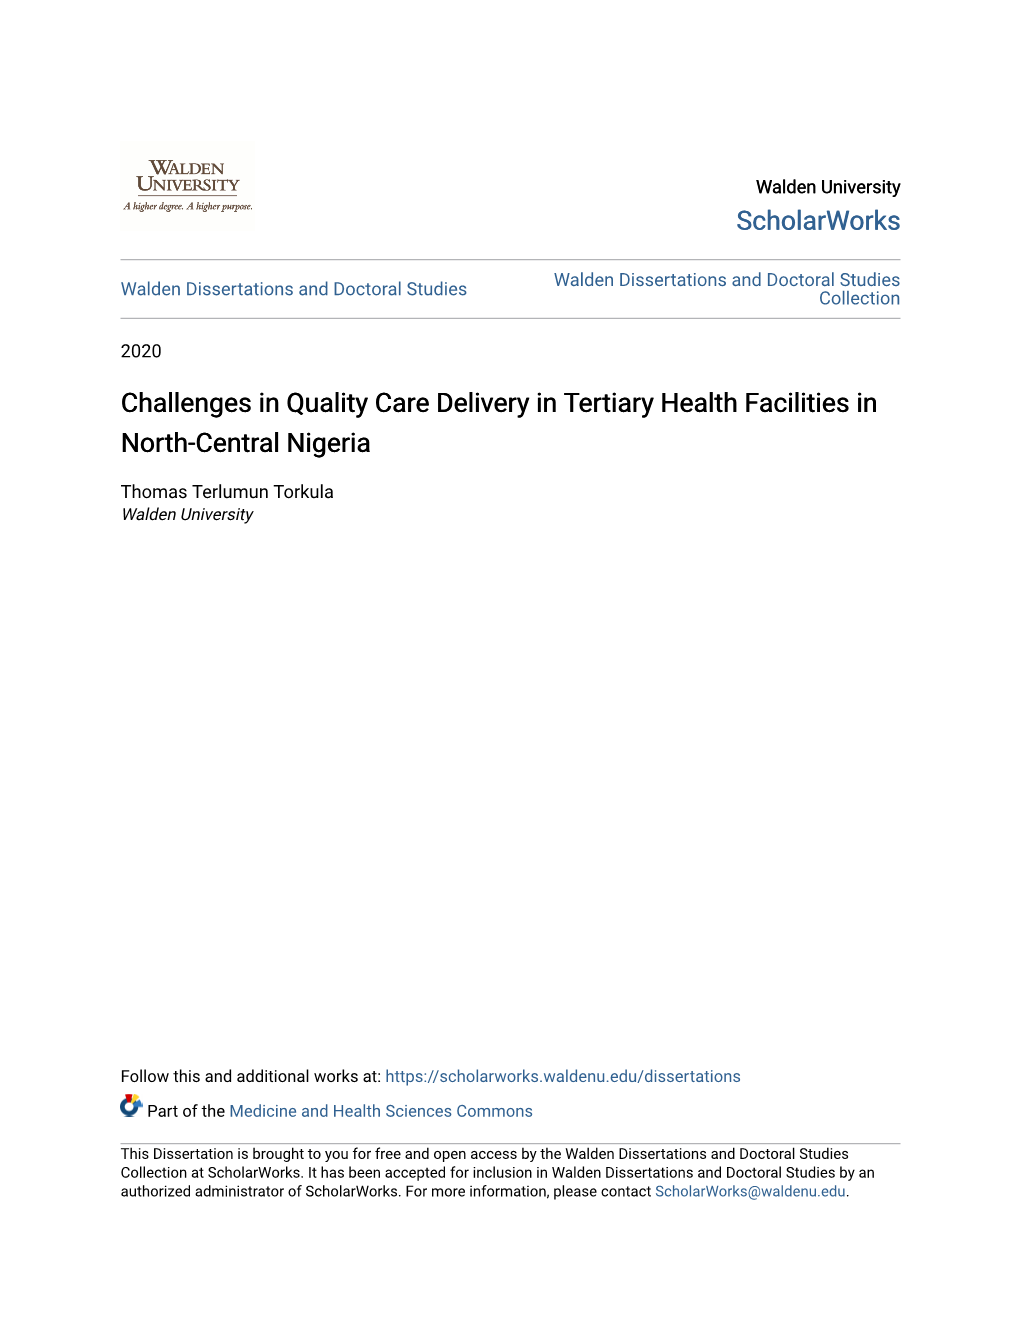 Challenges in Quality Care Delivery in Tertiary Health Facilities in North-Central Nigeria